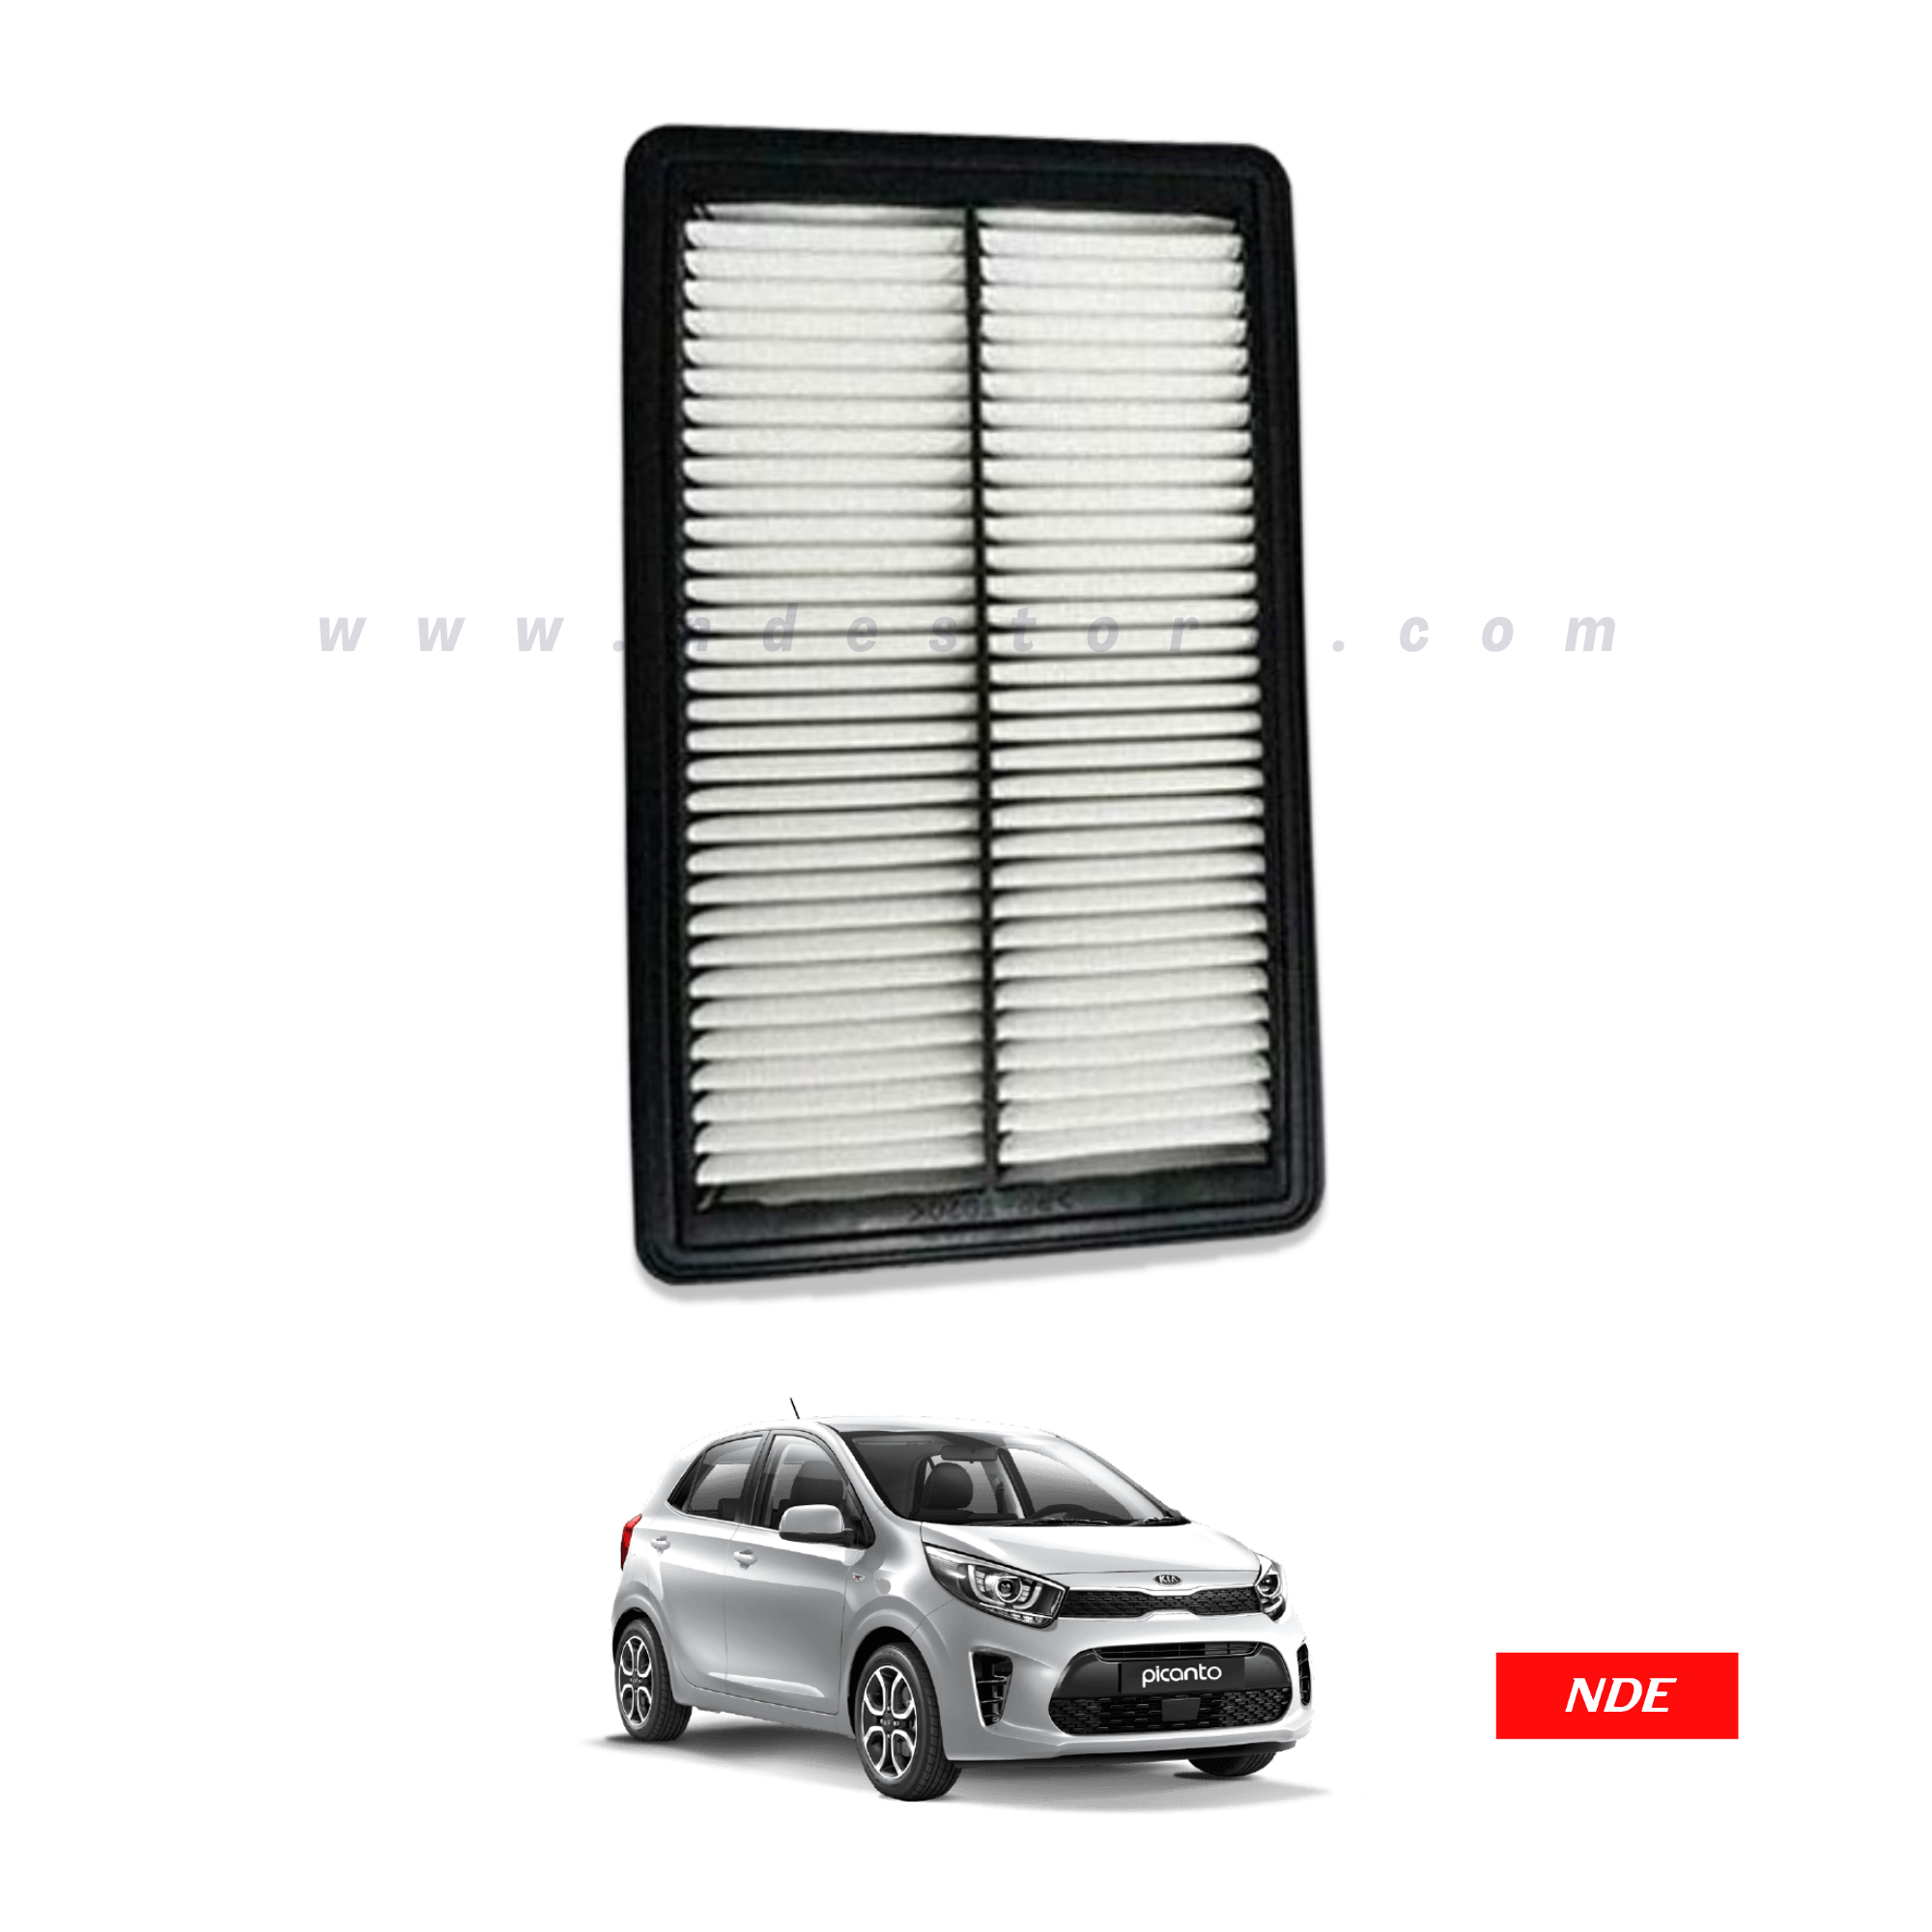 AIR FILTER FOR KIA PICANTO (IMPORTED)